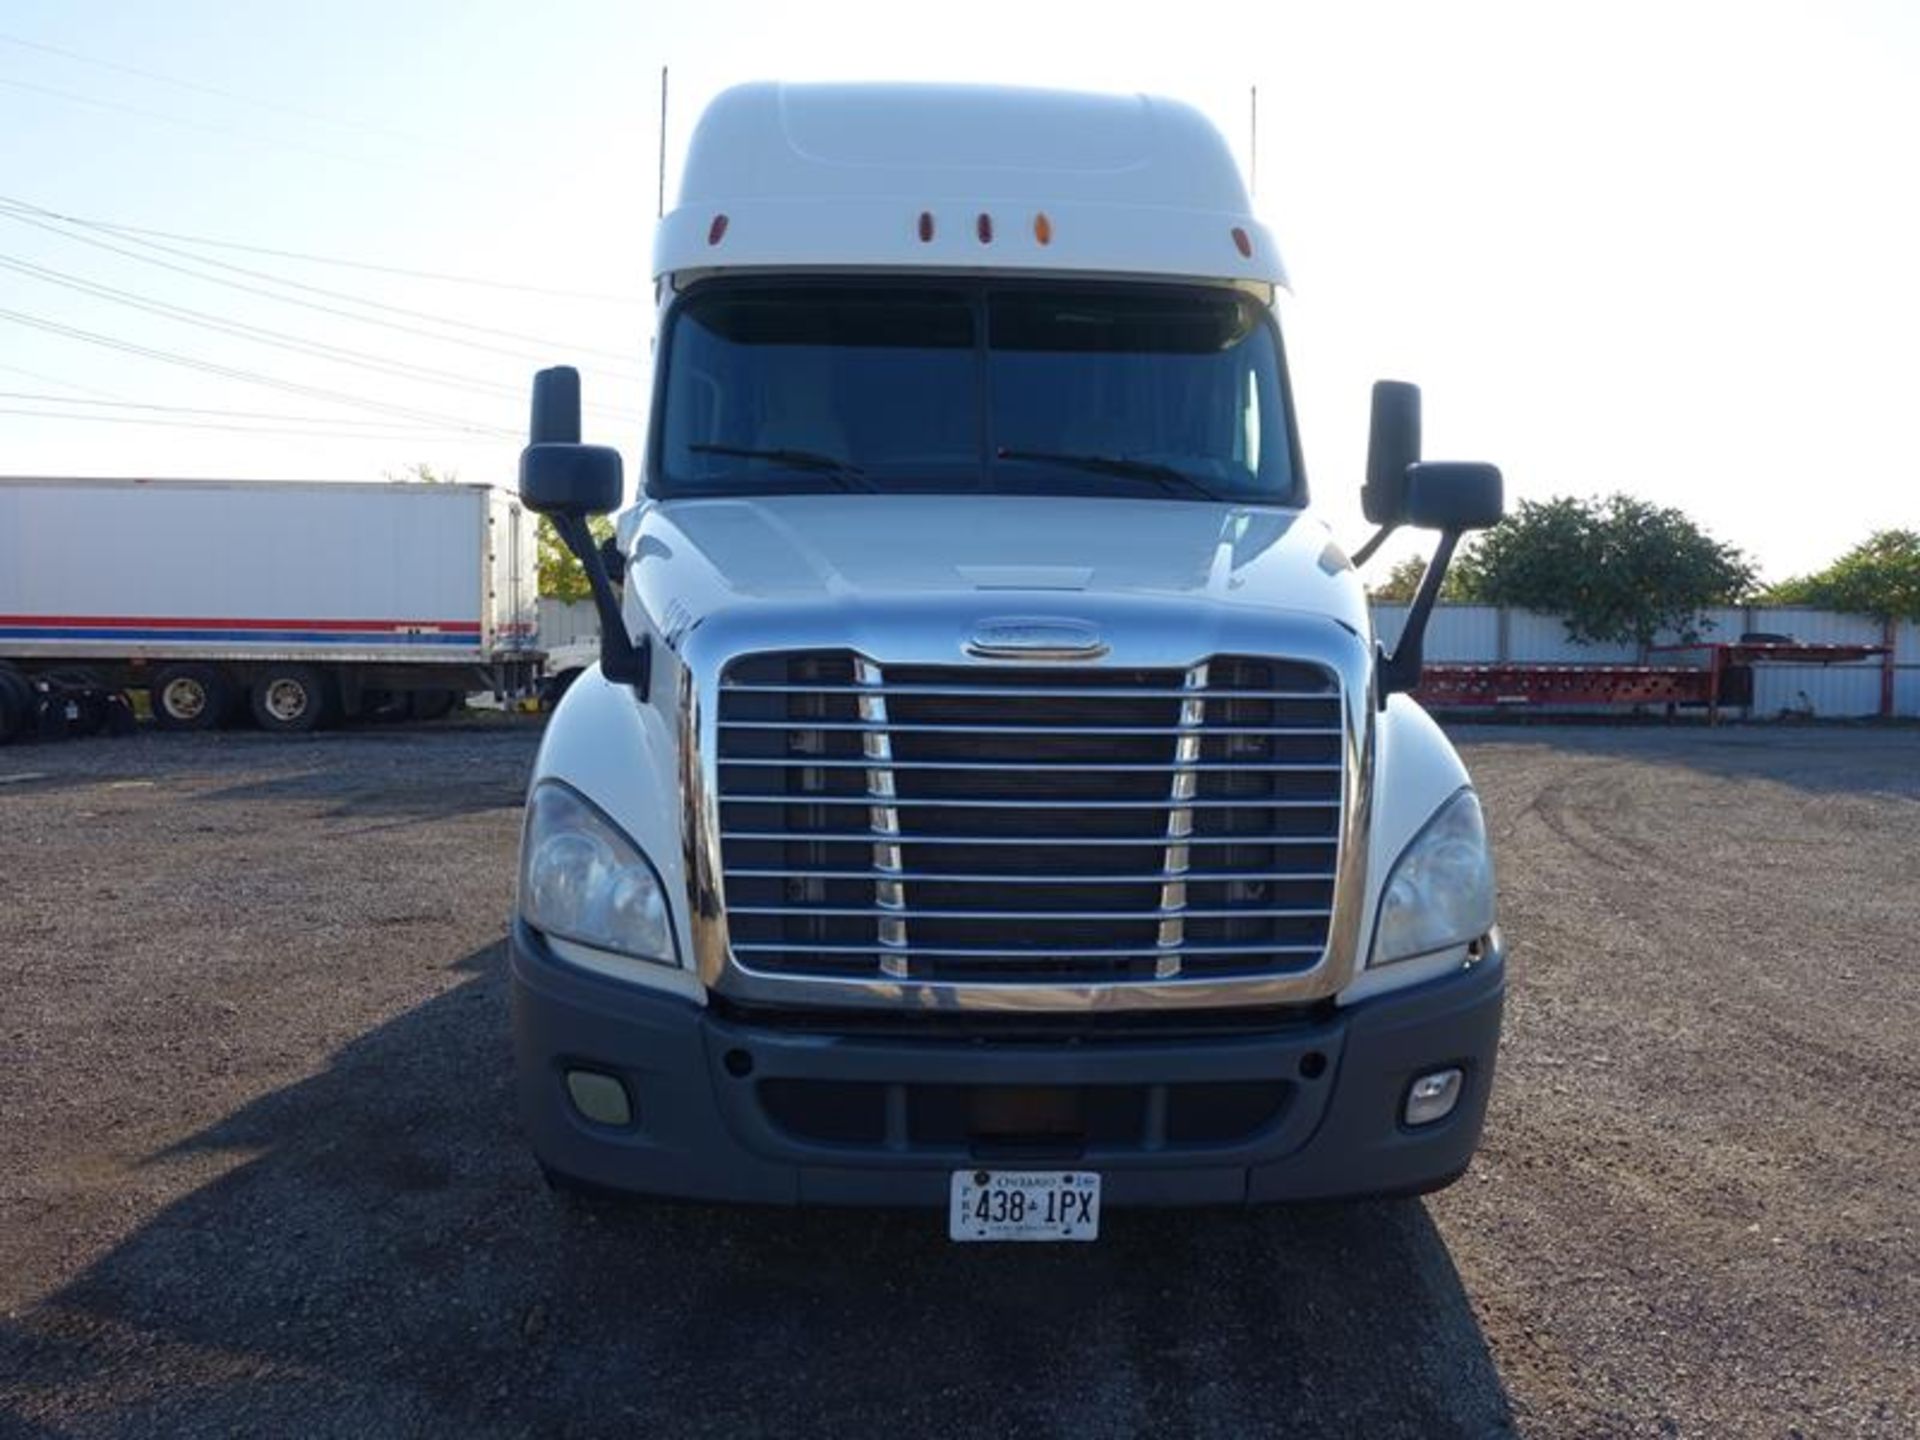 2013, FREIGHTLINER, CASCADIA 125, HIGH RISE, SLEEPER TRUCK TRACTOR, 72", SLEEPER CAB - Image 2 of 27